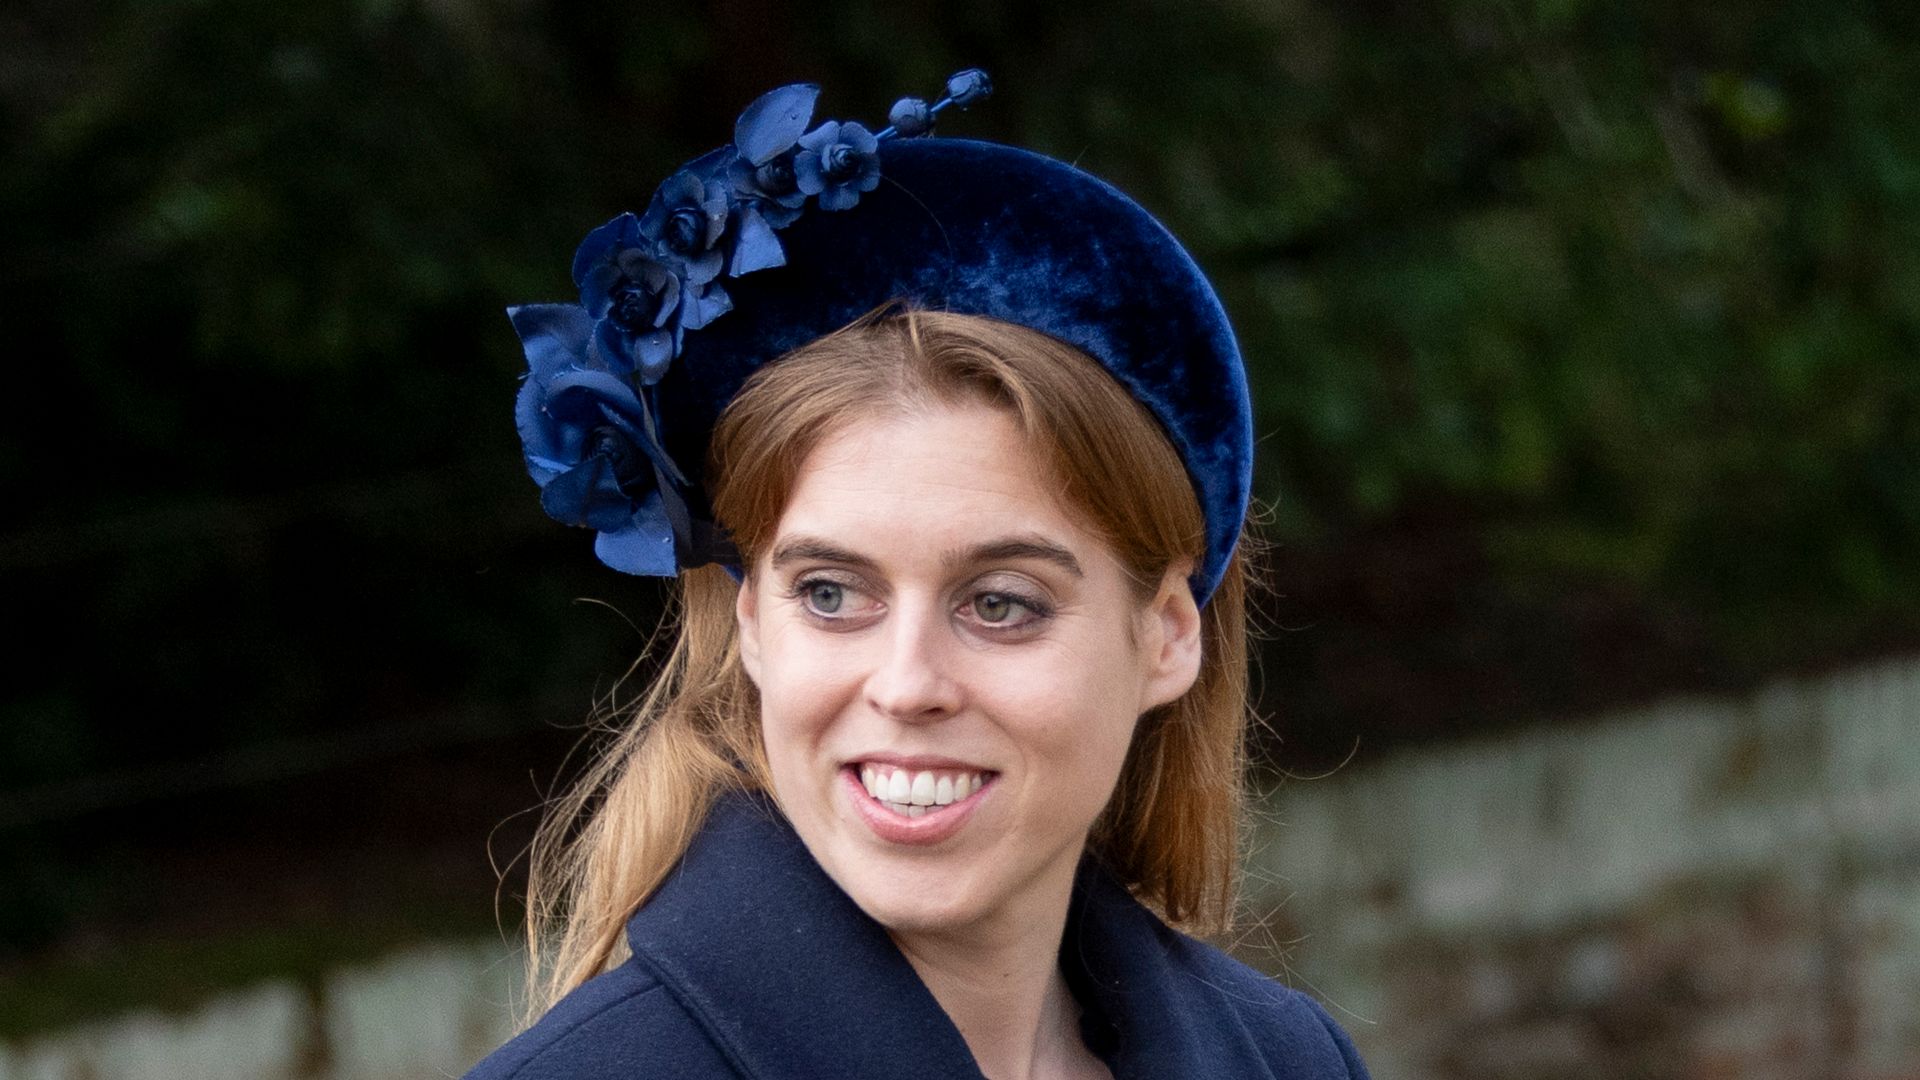 Princess Beatrice wore a stunning padded headband in navy blue